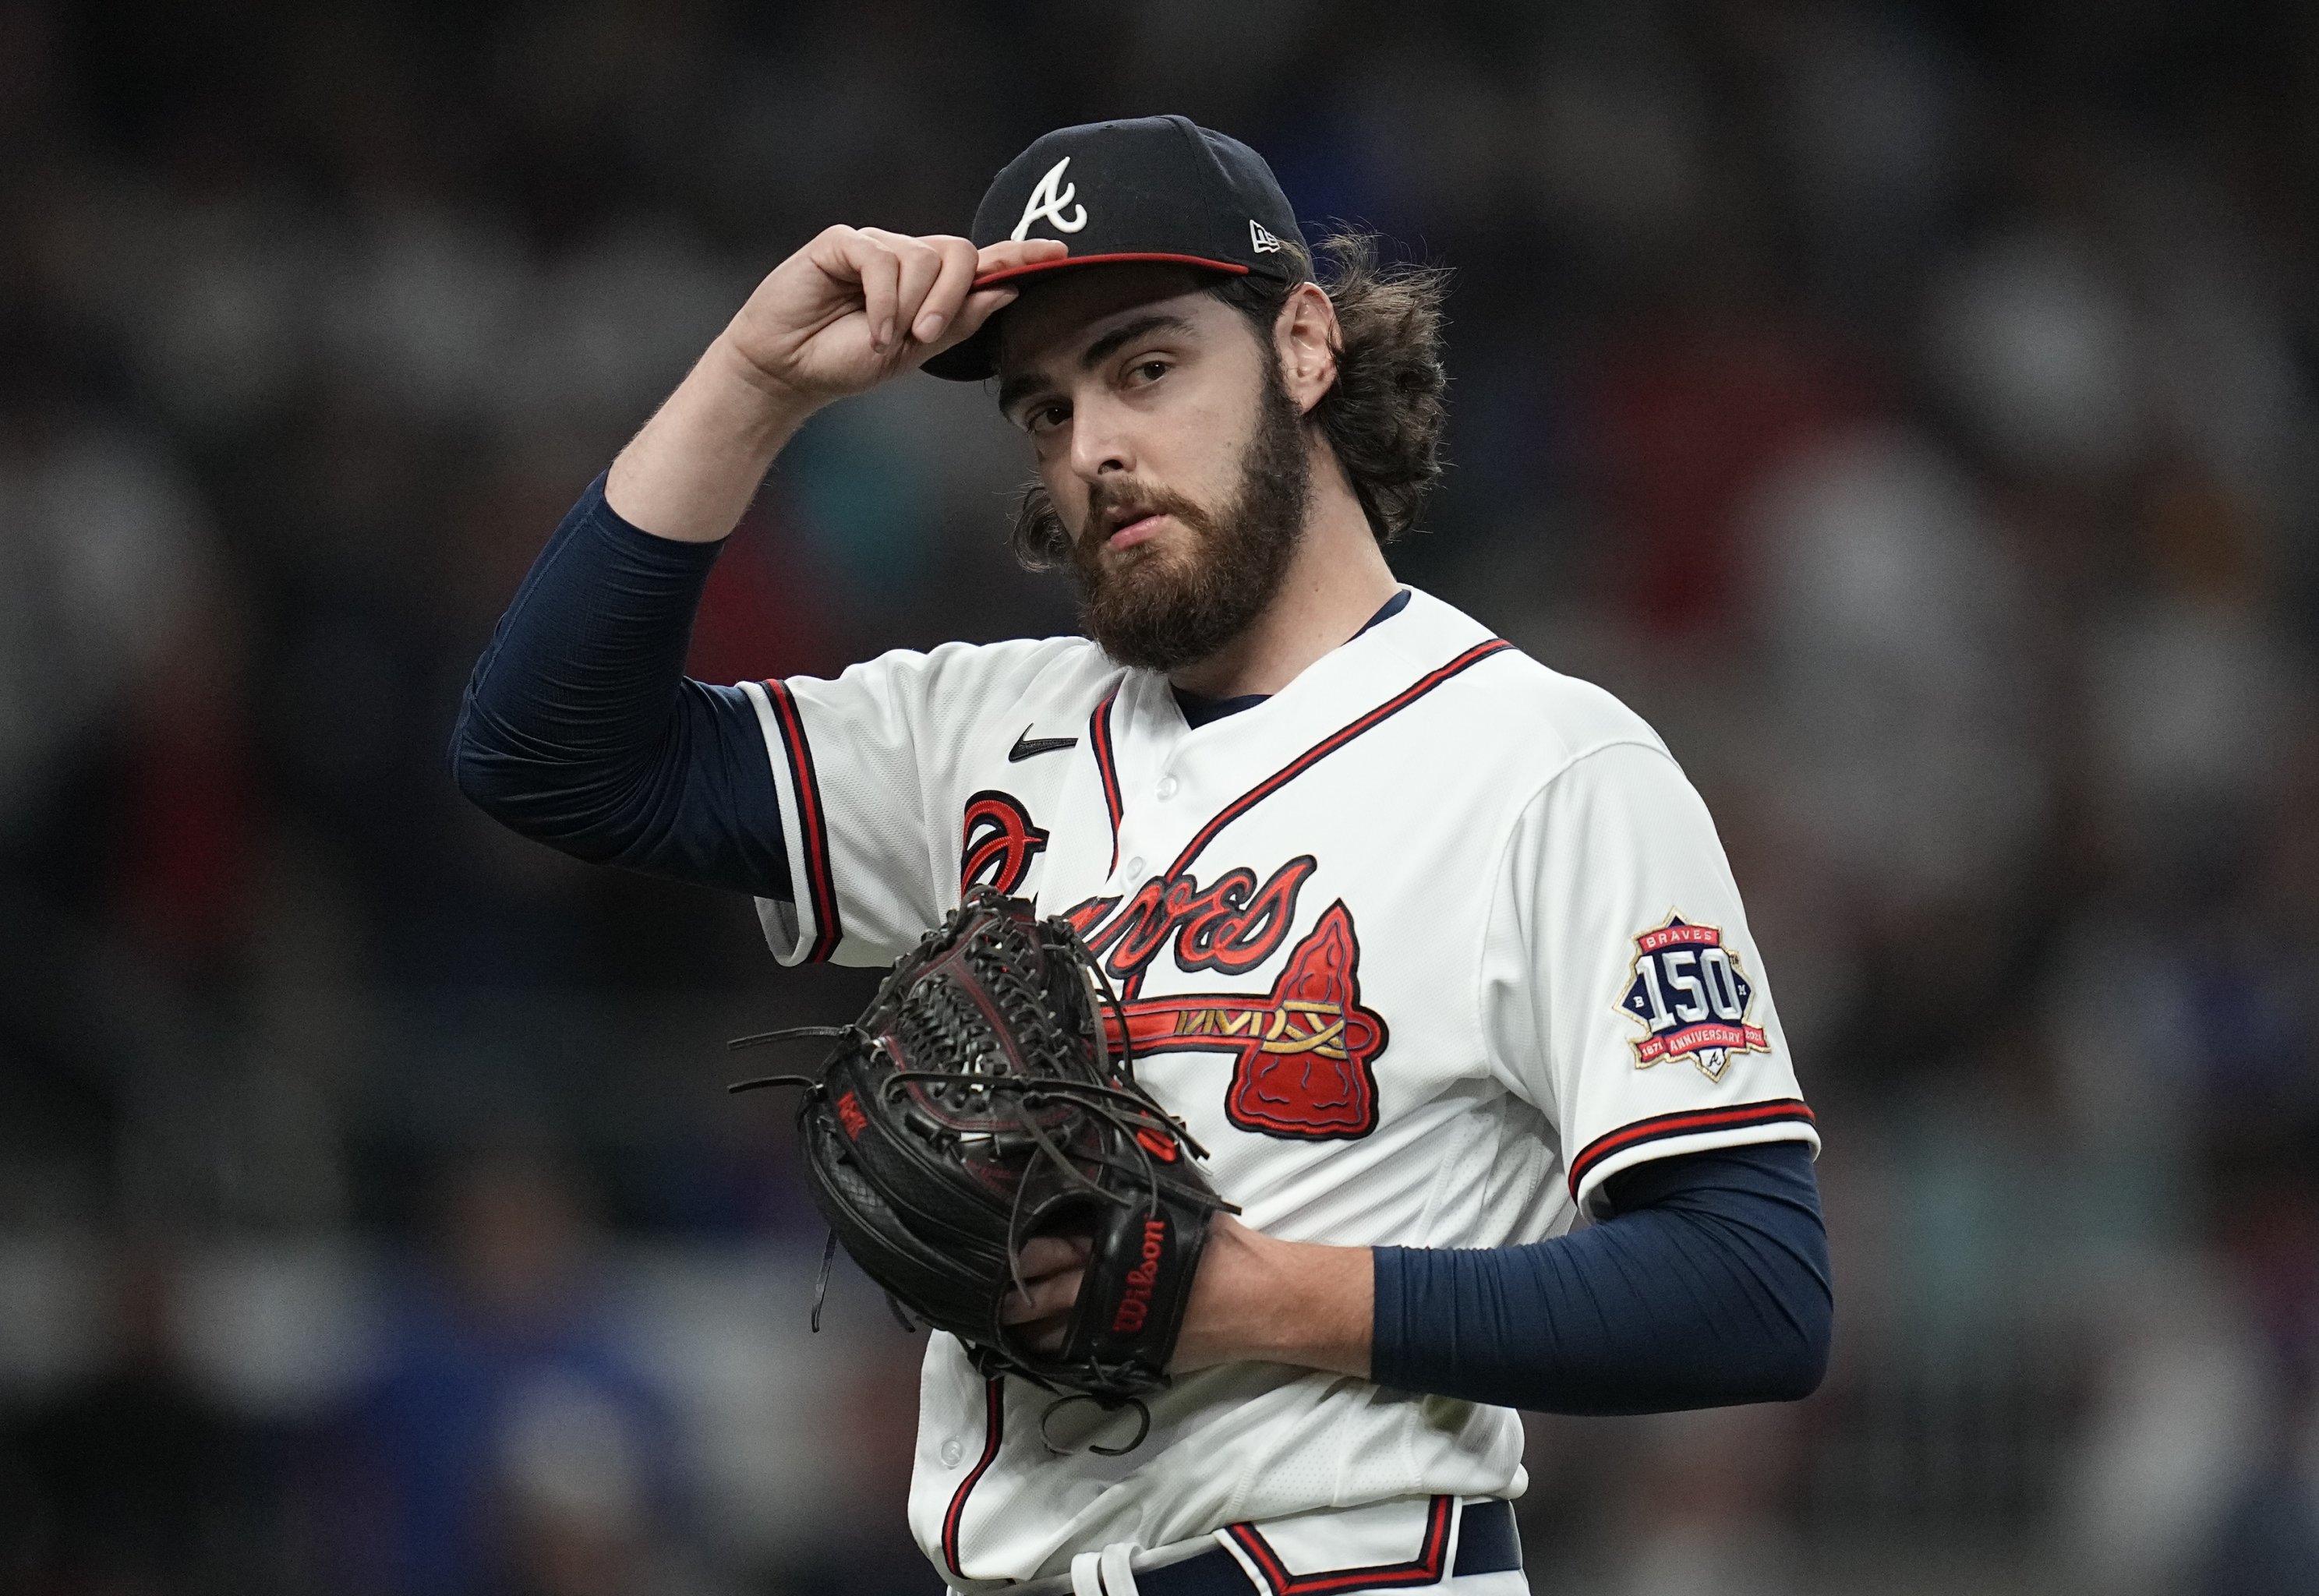 2021 NLCS preview: Atlanta Braves starting pitching and bullpen